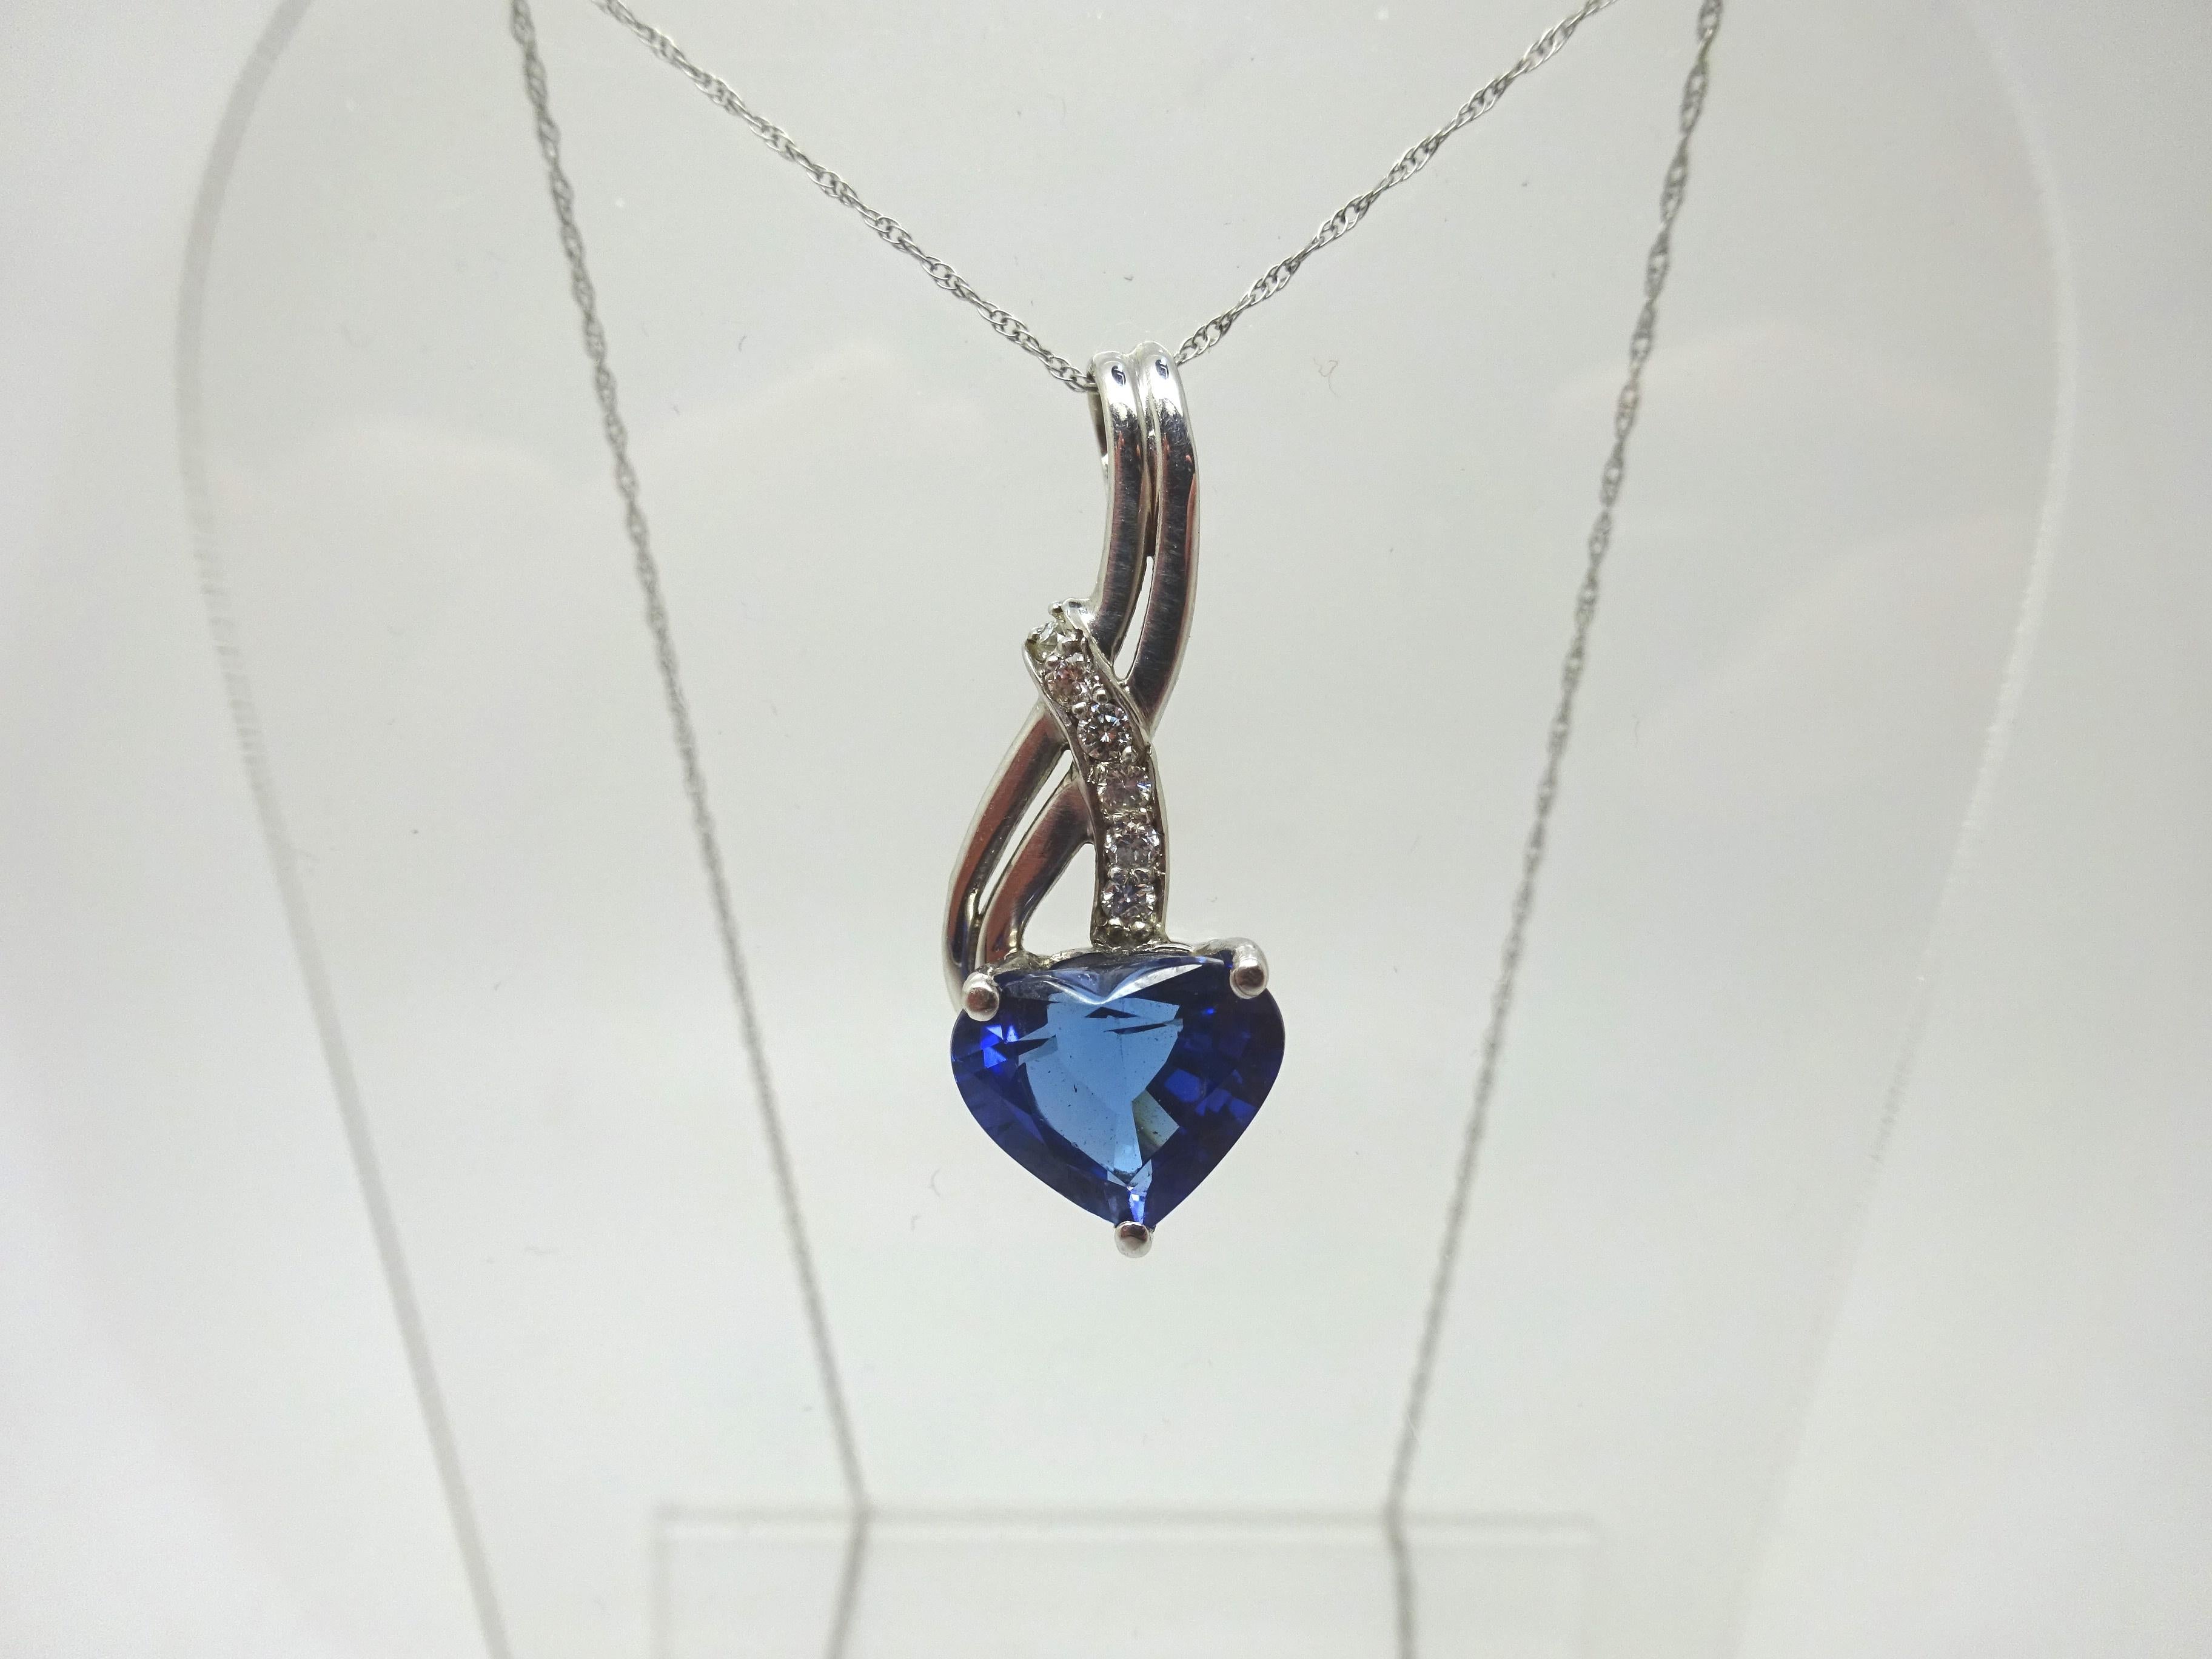 Radiant 14k white gold necklace with a 3.10ct tanzanite in a shape of a heart with a brilliant blue color. The tanzanite measures 9x10mm. The pendant also has six dazzling diamonds that are 2mm. The length of the chain is 18 3/4